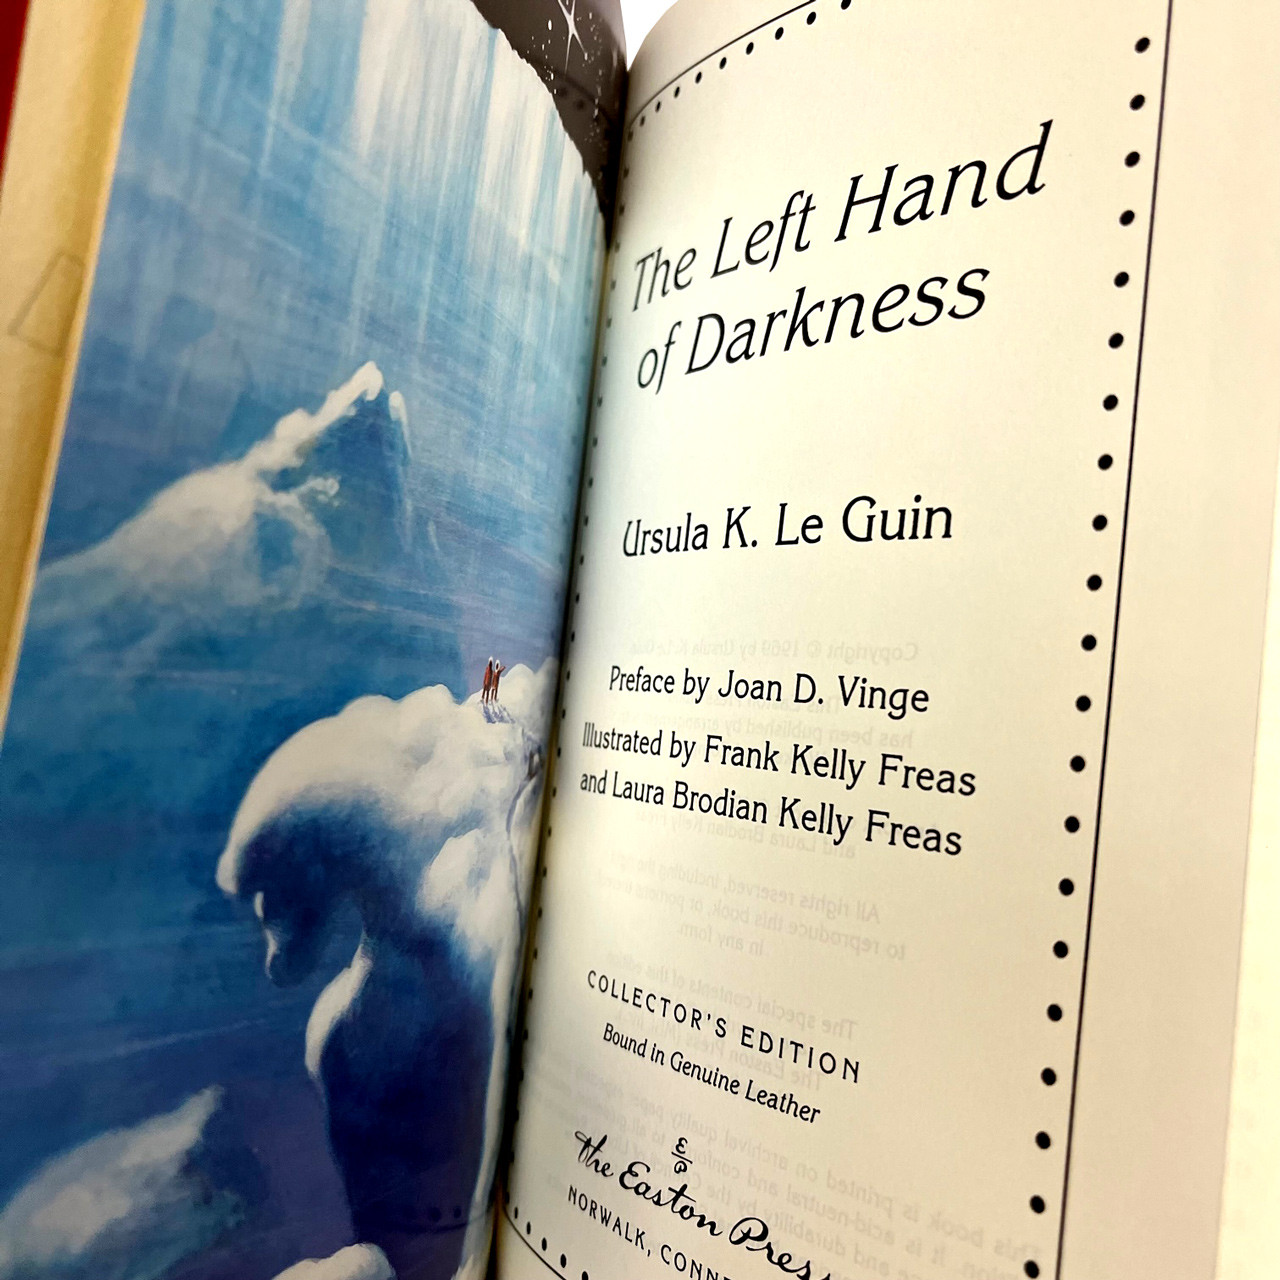 Ursula K. Le Guin "The Left Hand of Darkness" Signed Limited Edition, Leather Bound Collector's Edition